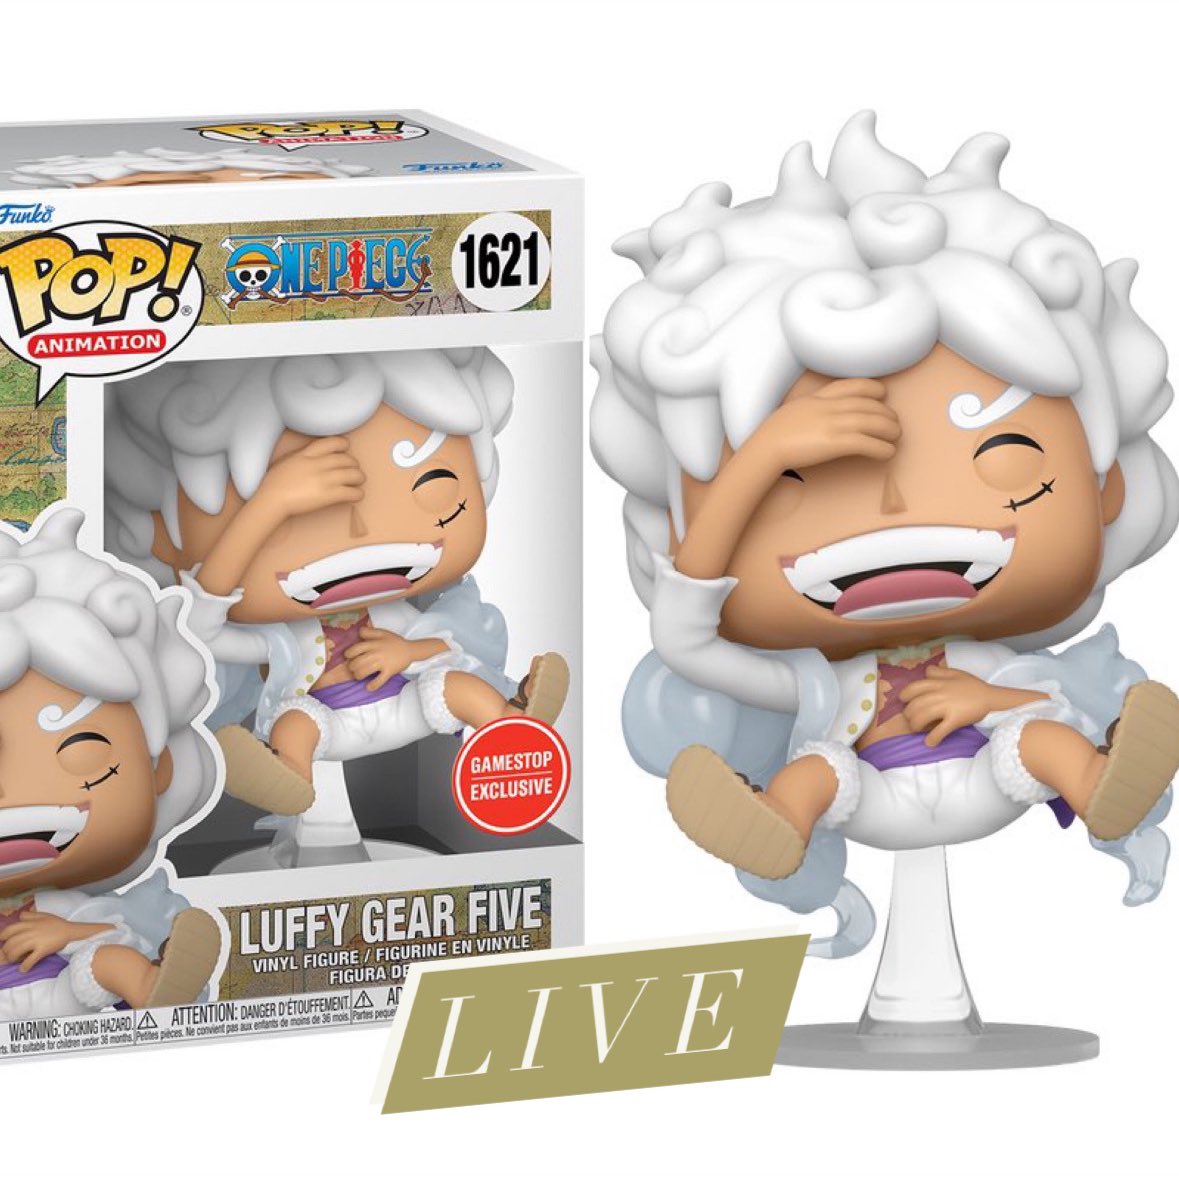 Now live! Come get your Joy Boy now at the link below with the new GameStop exclusive Smiling Luffy Funko POP!
Linky ~ bit.ly/3wthazo
#Ad #OnePiece #Luffy #FPN #FunkoPOPNews #Funko #POP #POPVinyl #FunkoPOP #FunkoSoda